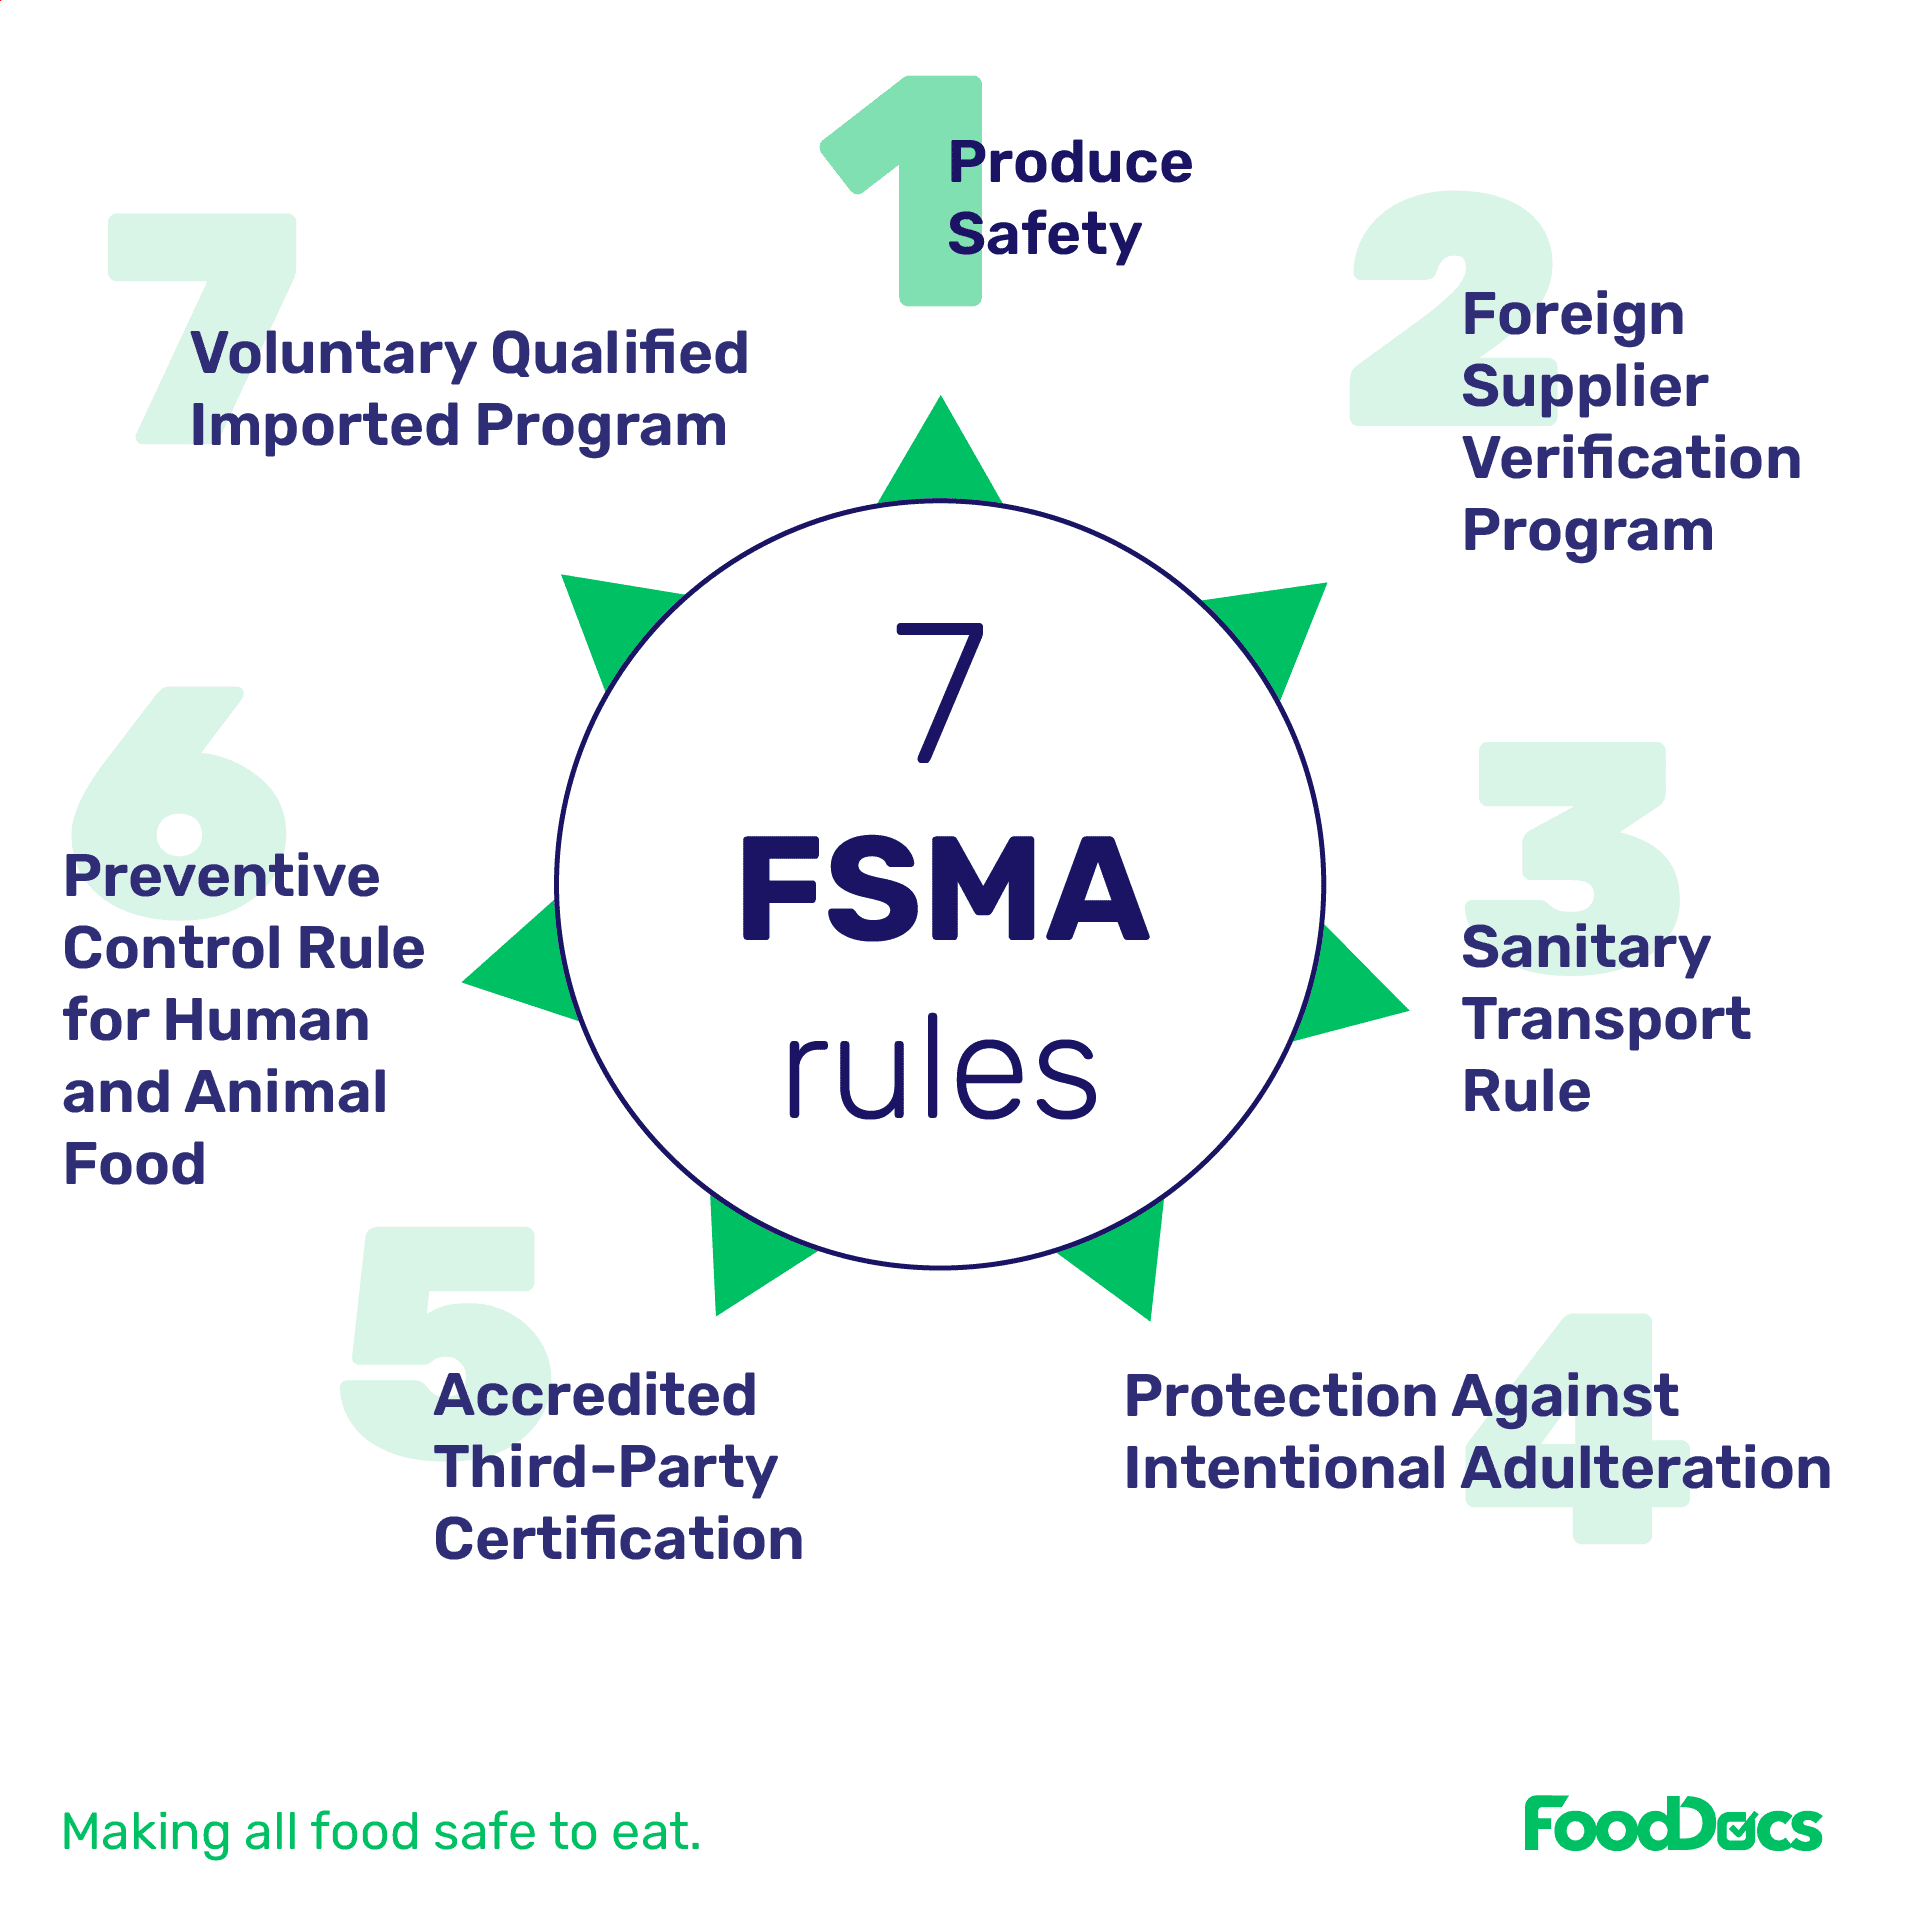 what are the 7 FSMA rules